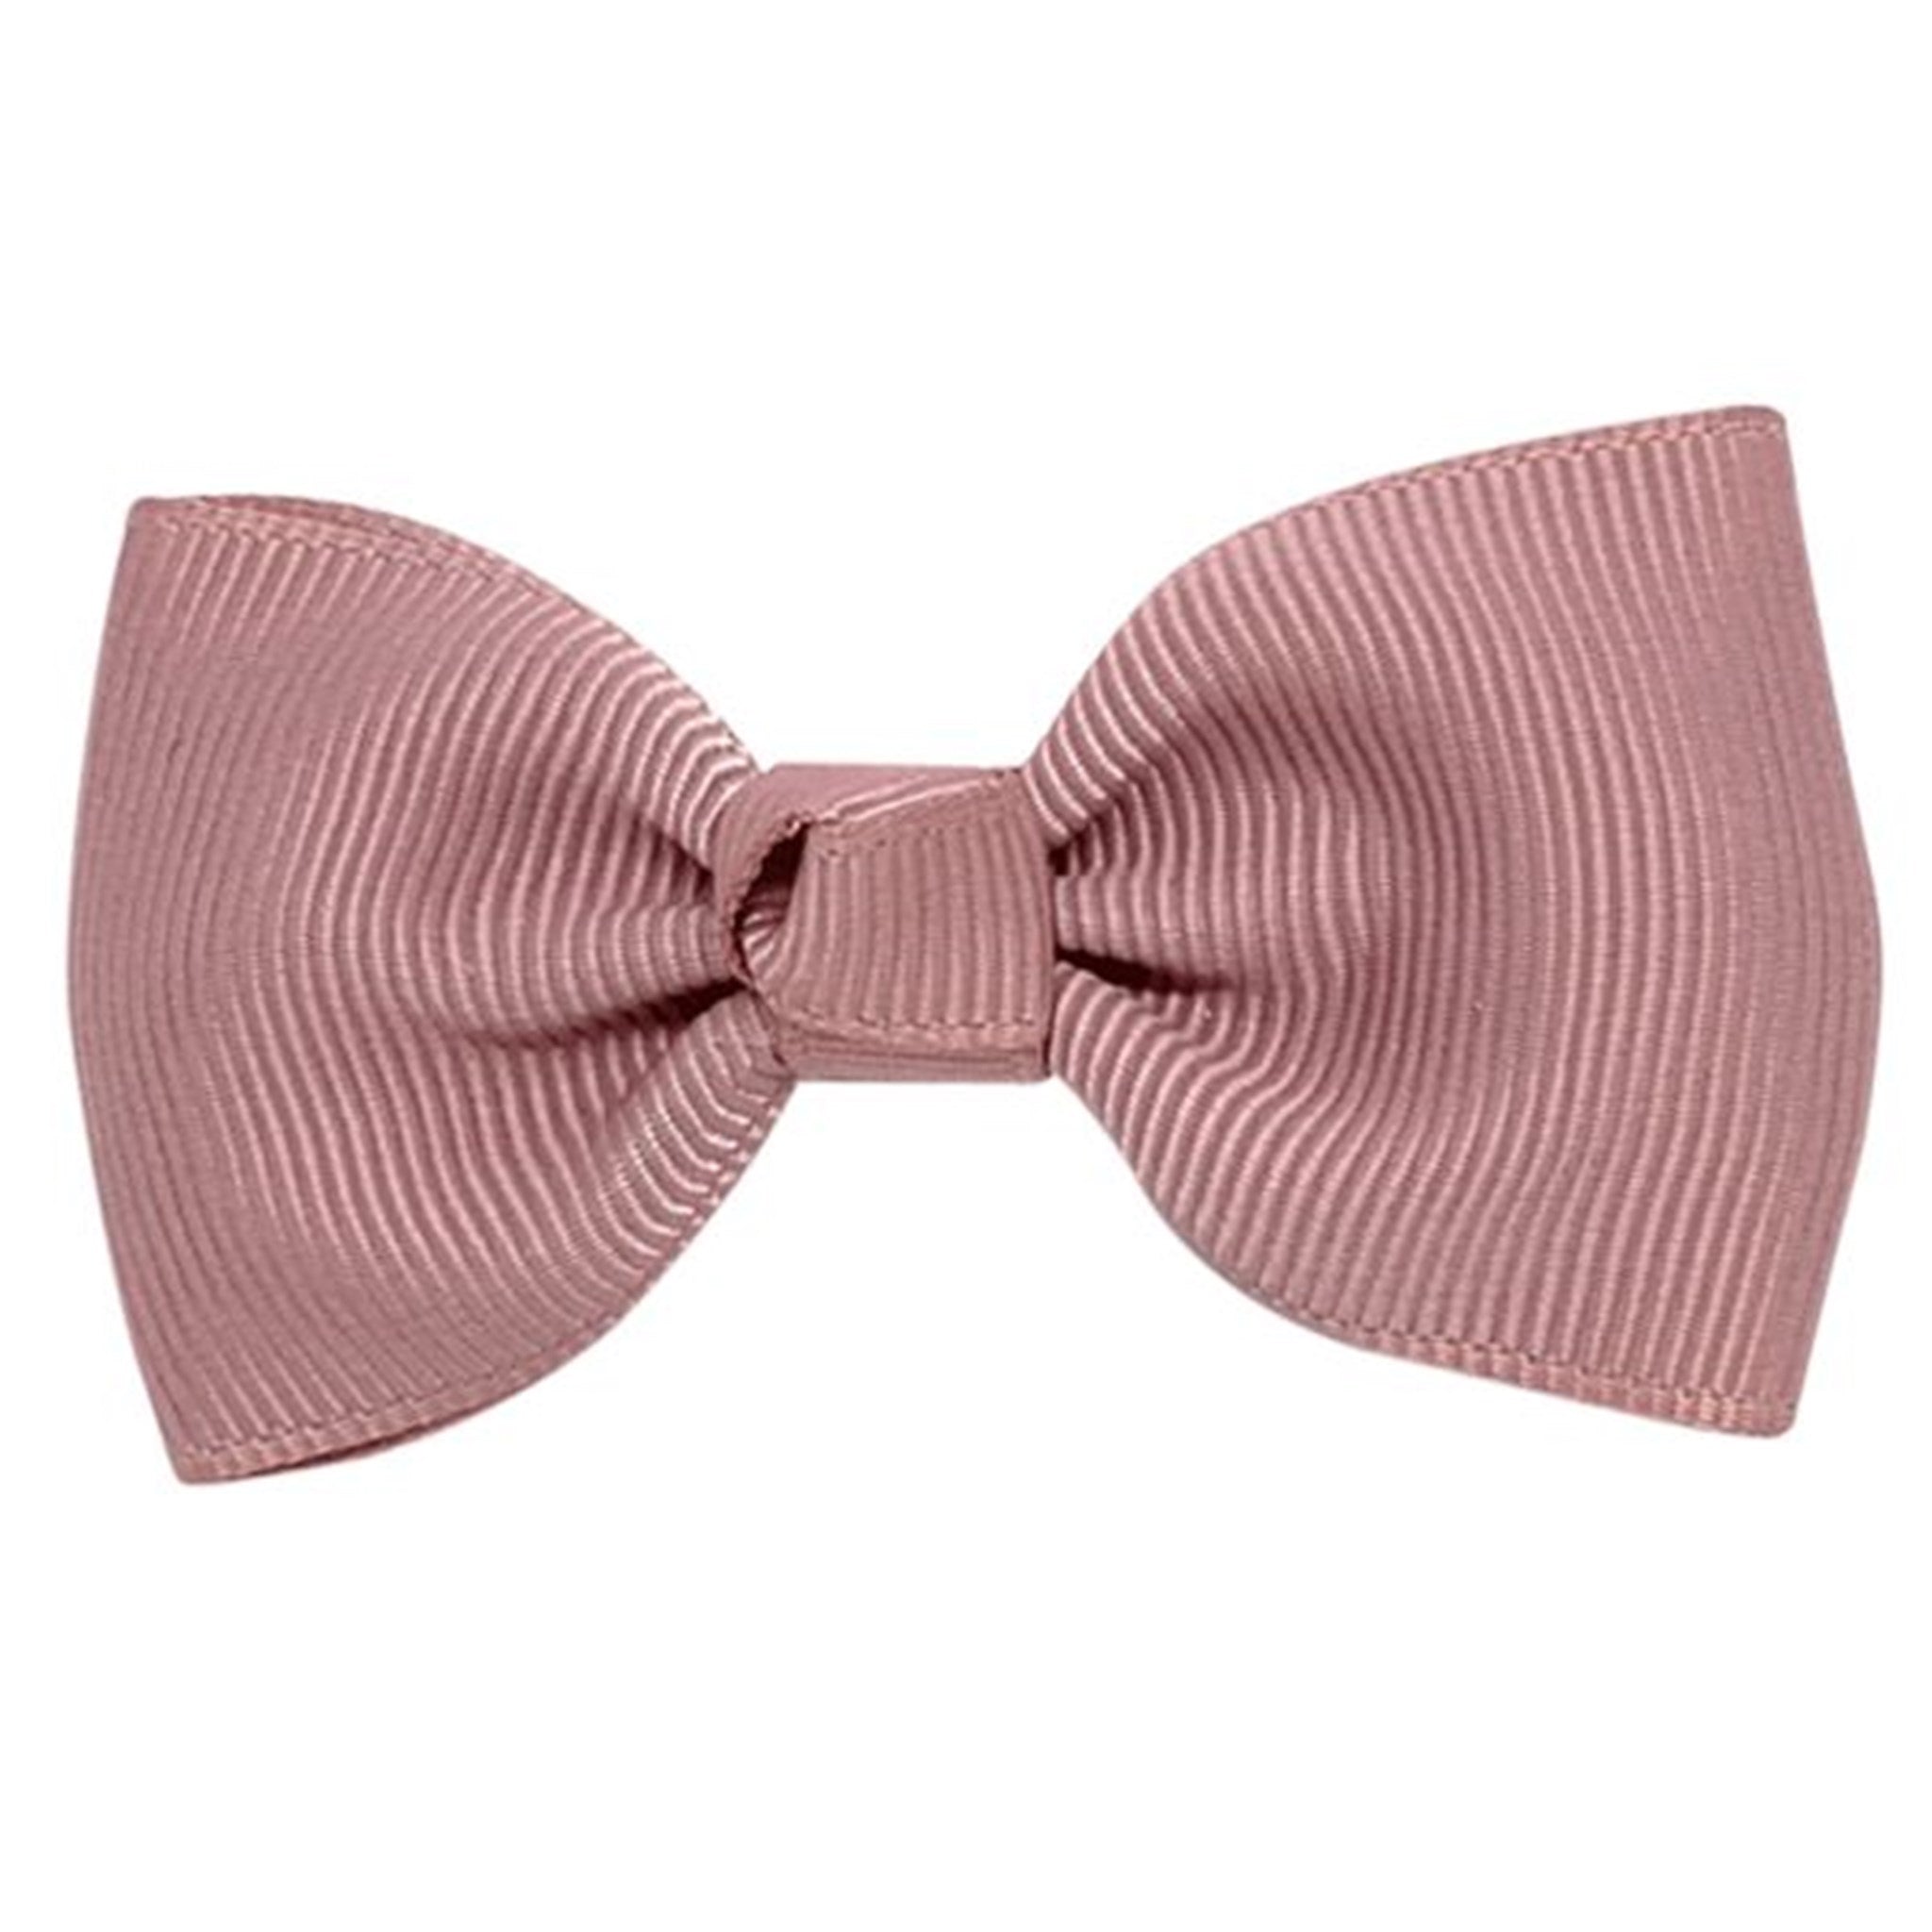 Bow's by Stær Bowtie Bow (Antique Rose)